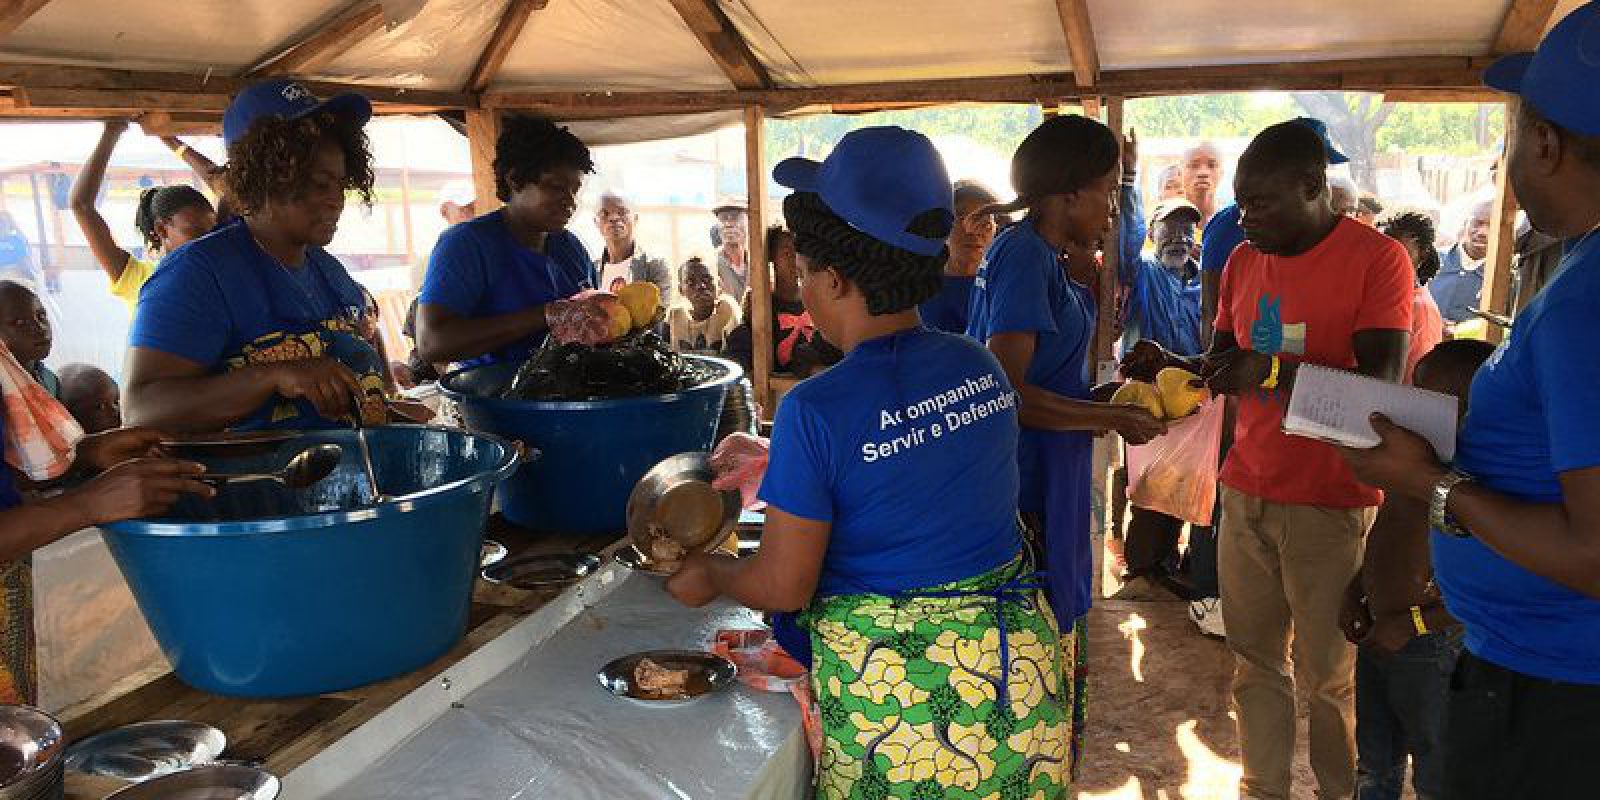 The JRS team in Angola serves the last dinner to the refugees who leave towards DRC on the first facilitated repatriation.